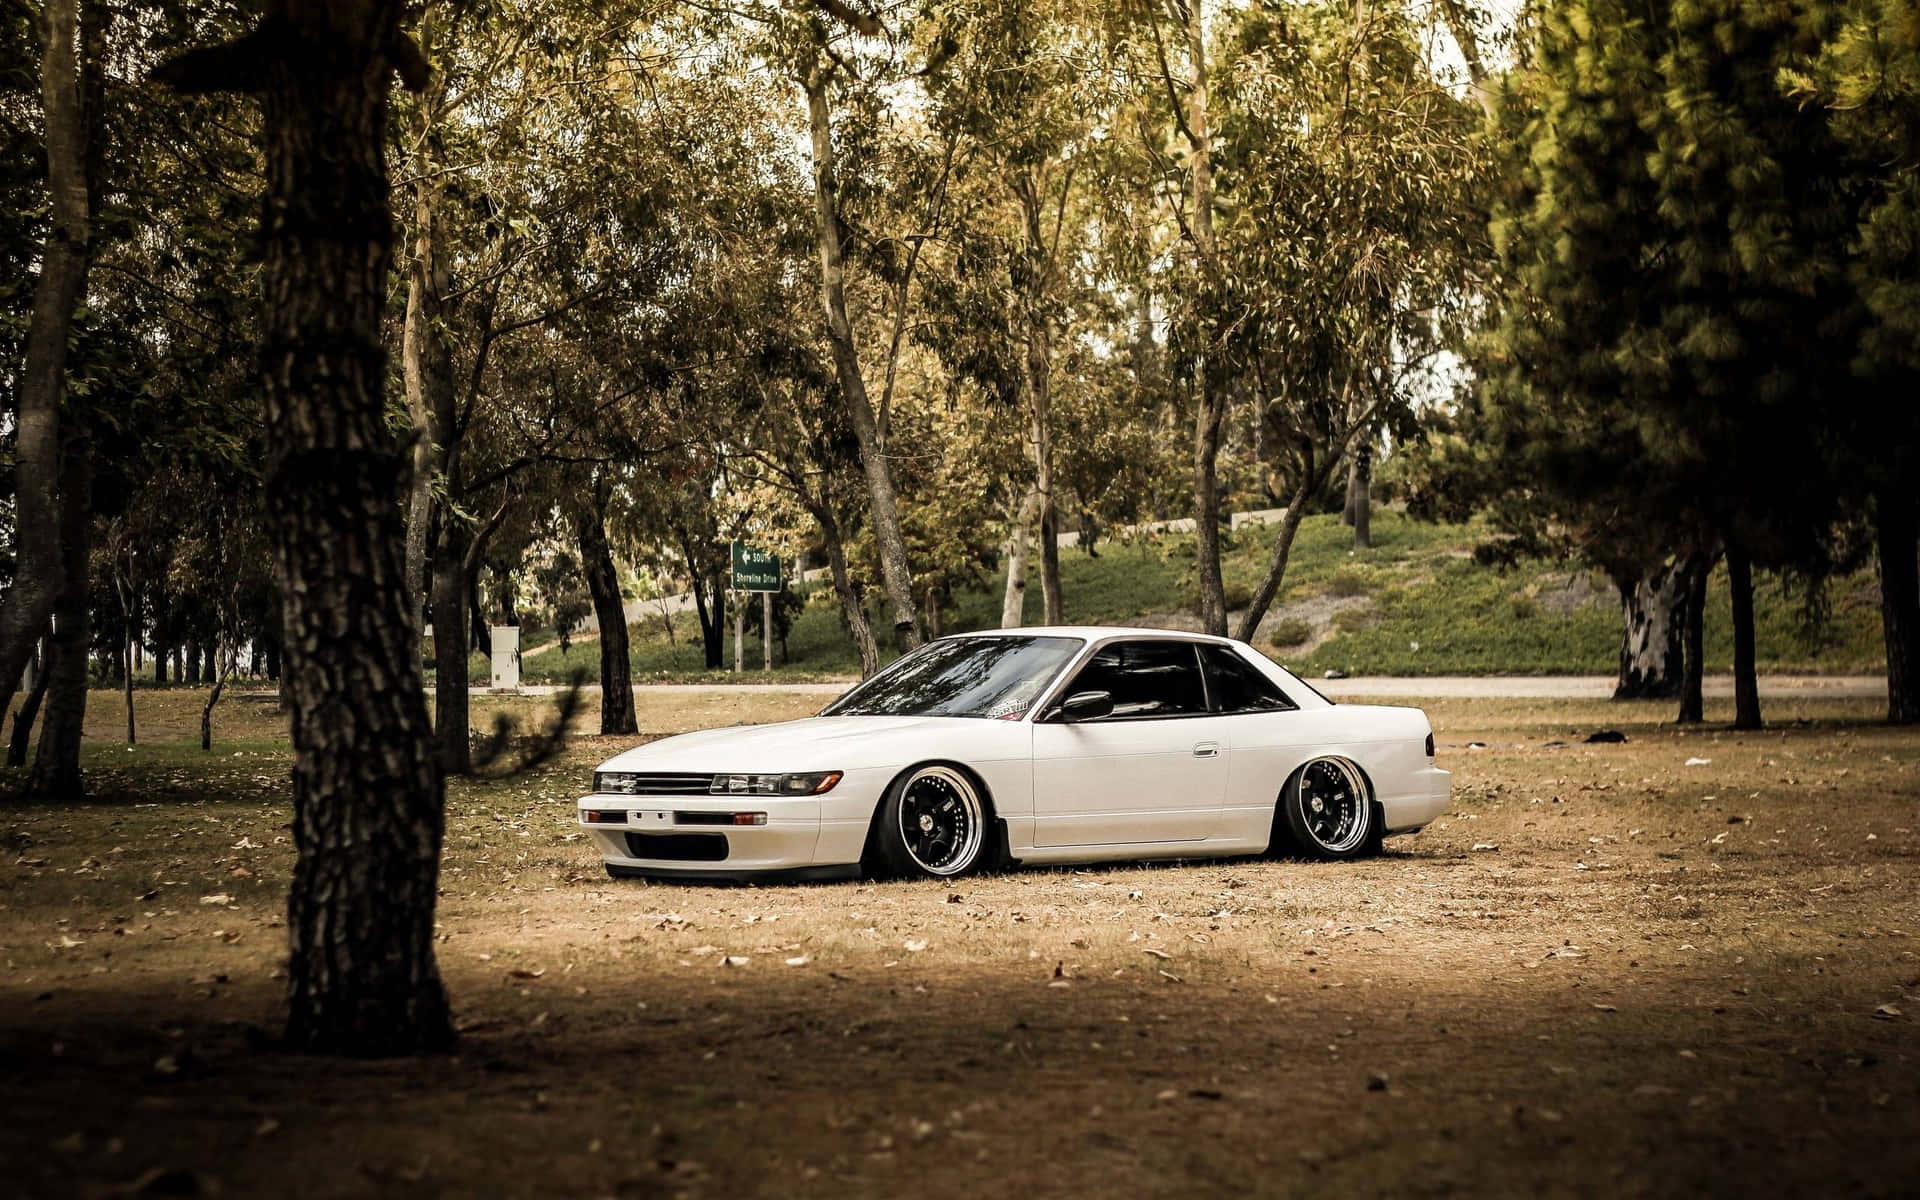 Nissan Silvia S13 - An Iconic Ride Wallpaper